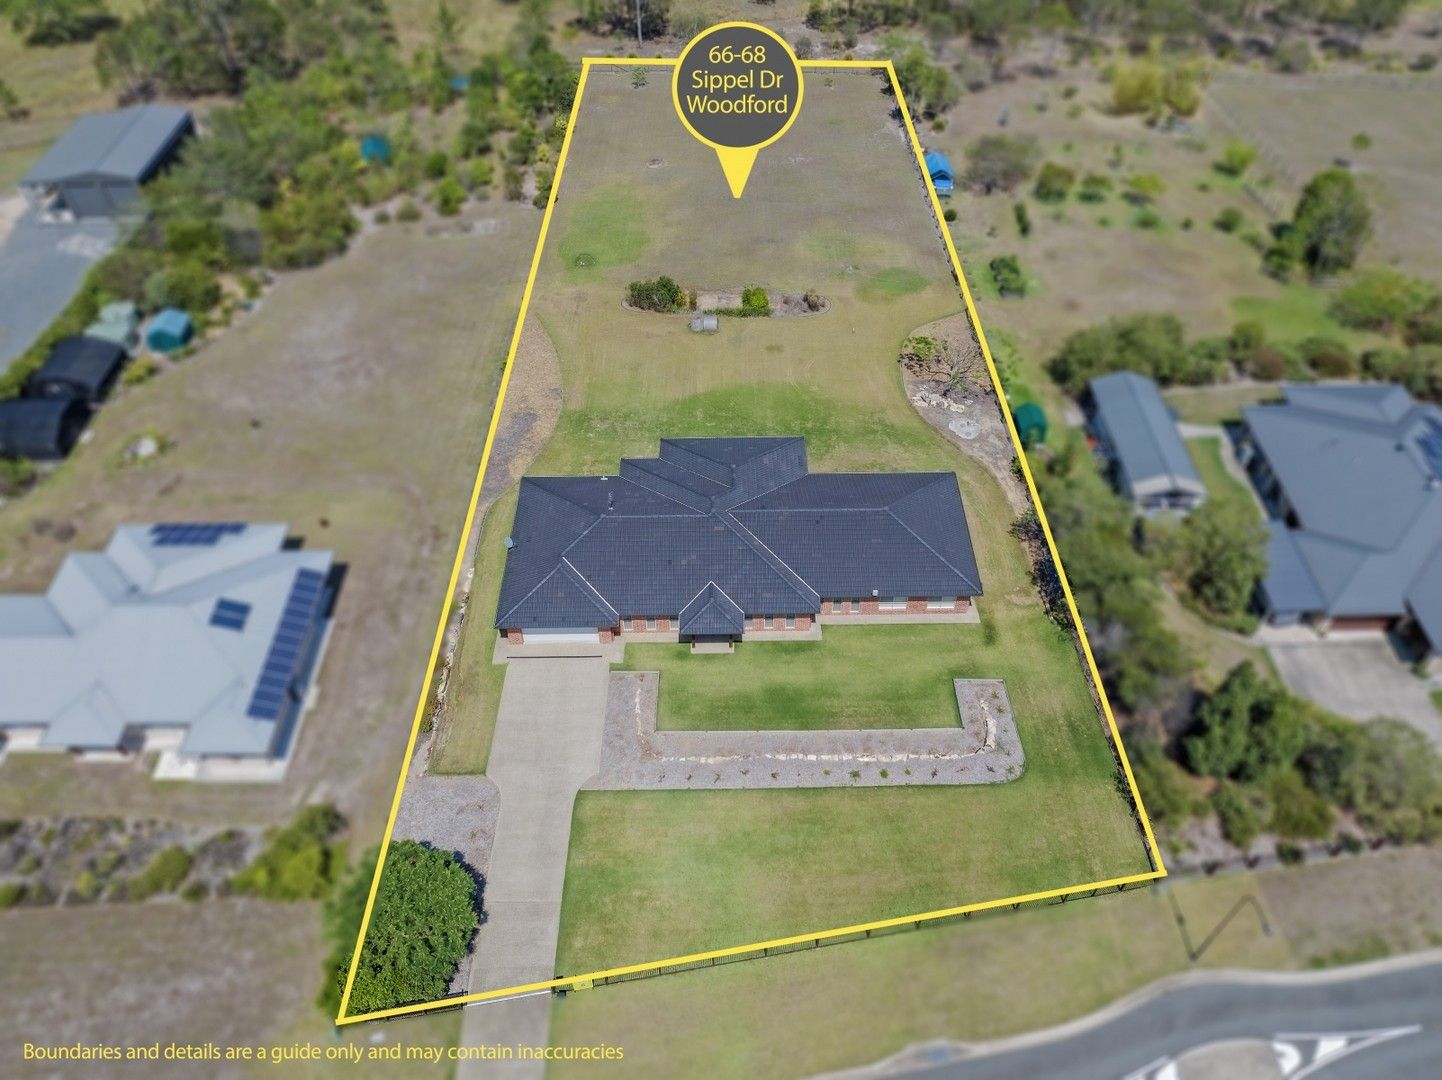 66-68 Sippel Drive, Woodford QLD 4514, Image 0